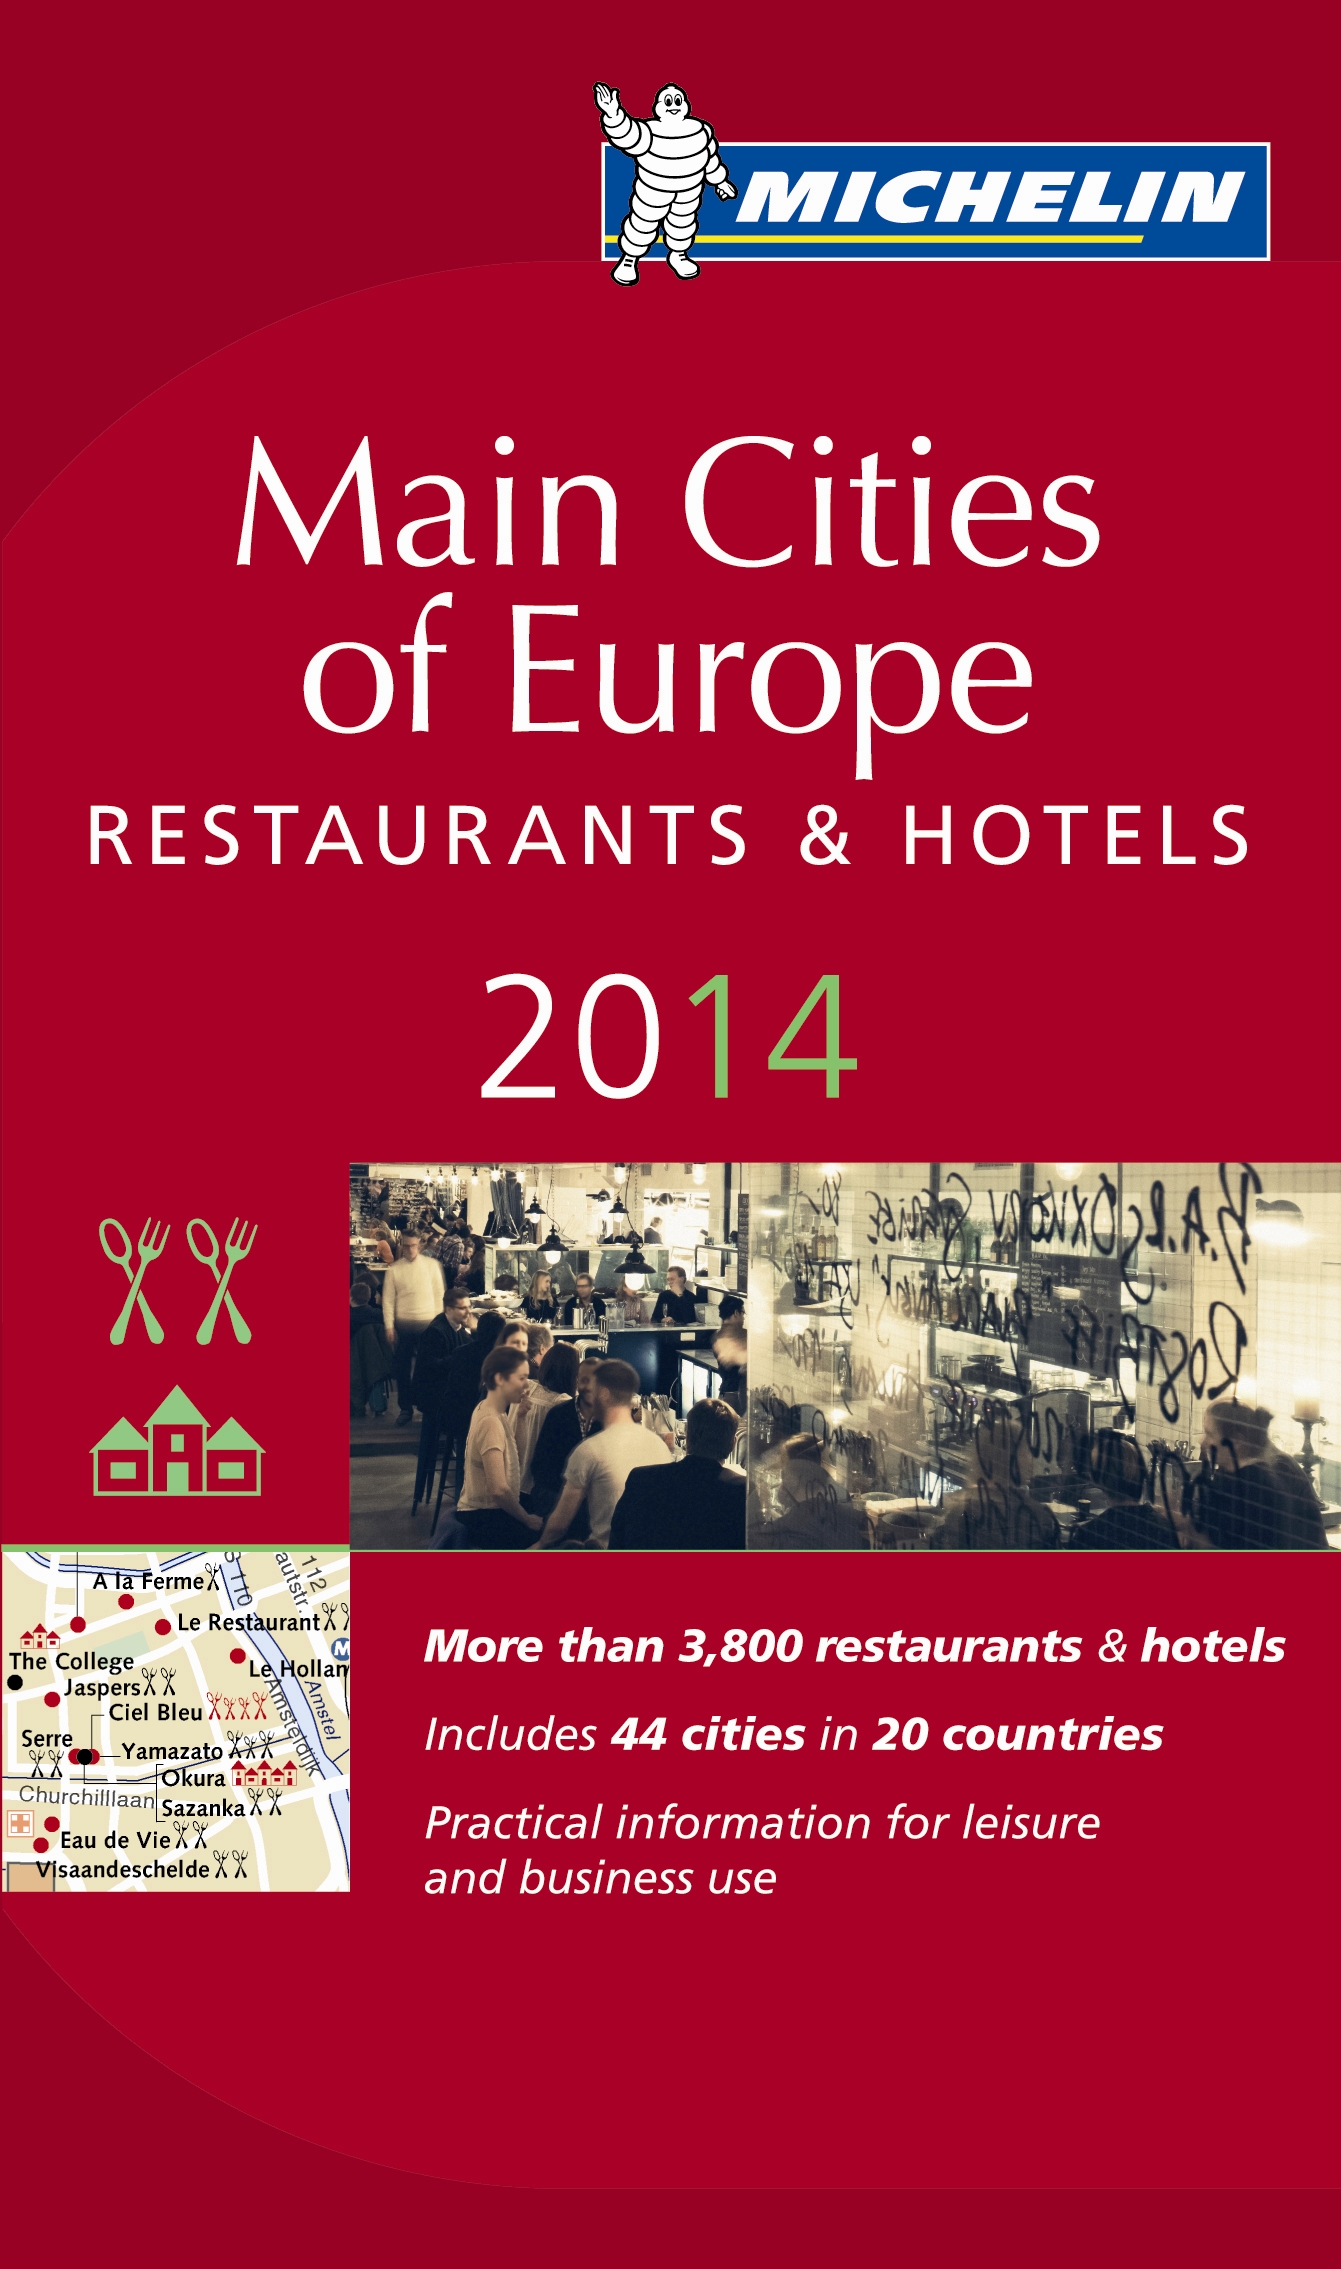 Greece : New two-star restaurant in Athens in the Michelin guide Main Cities of Europe 2014